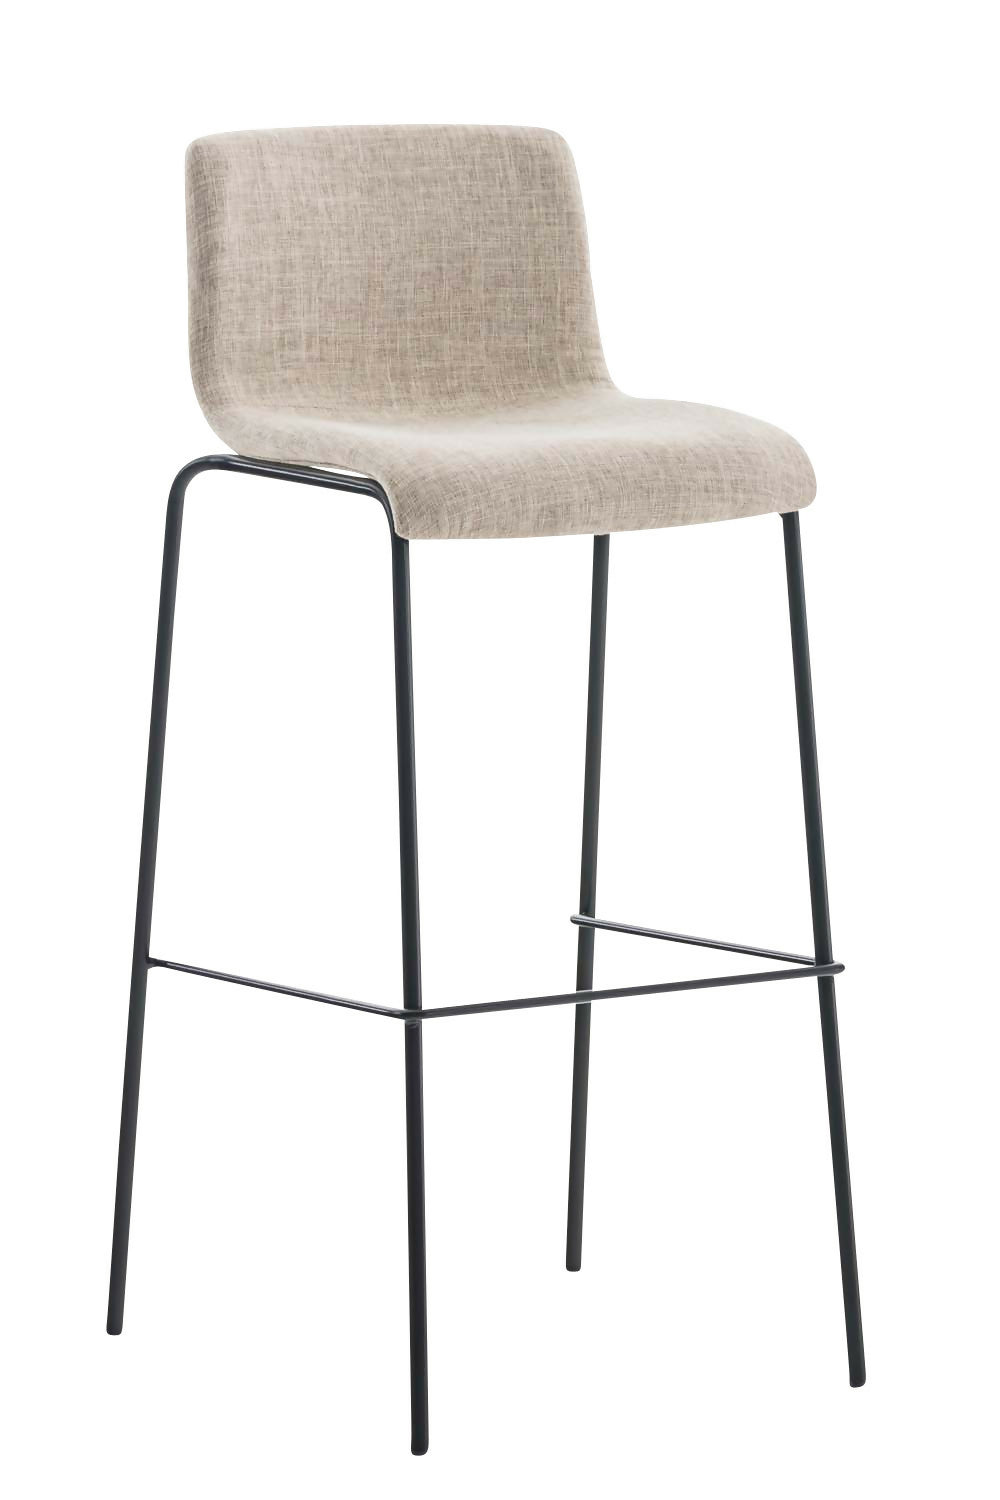 Bar stools and chairs